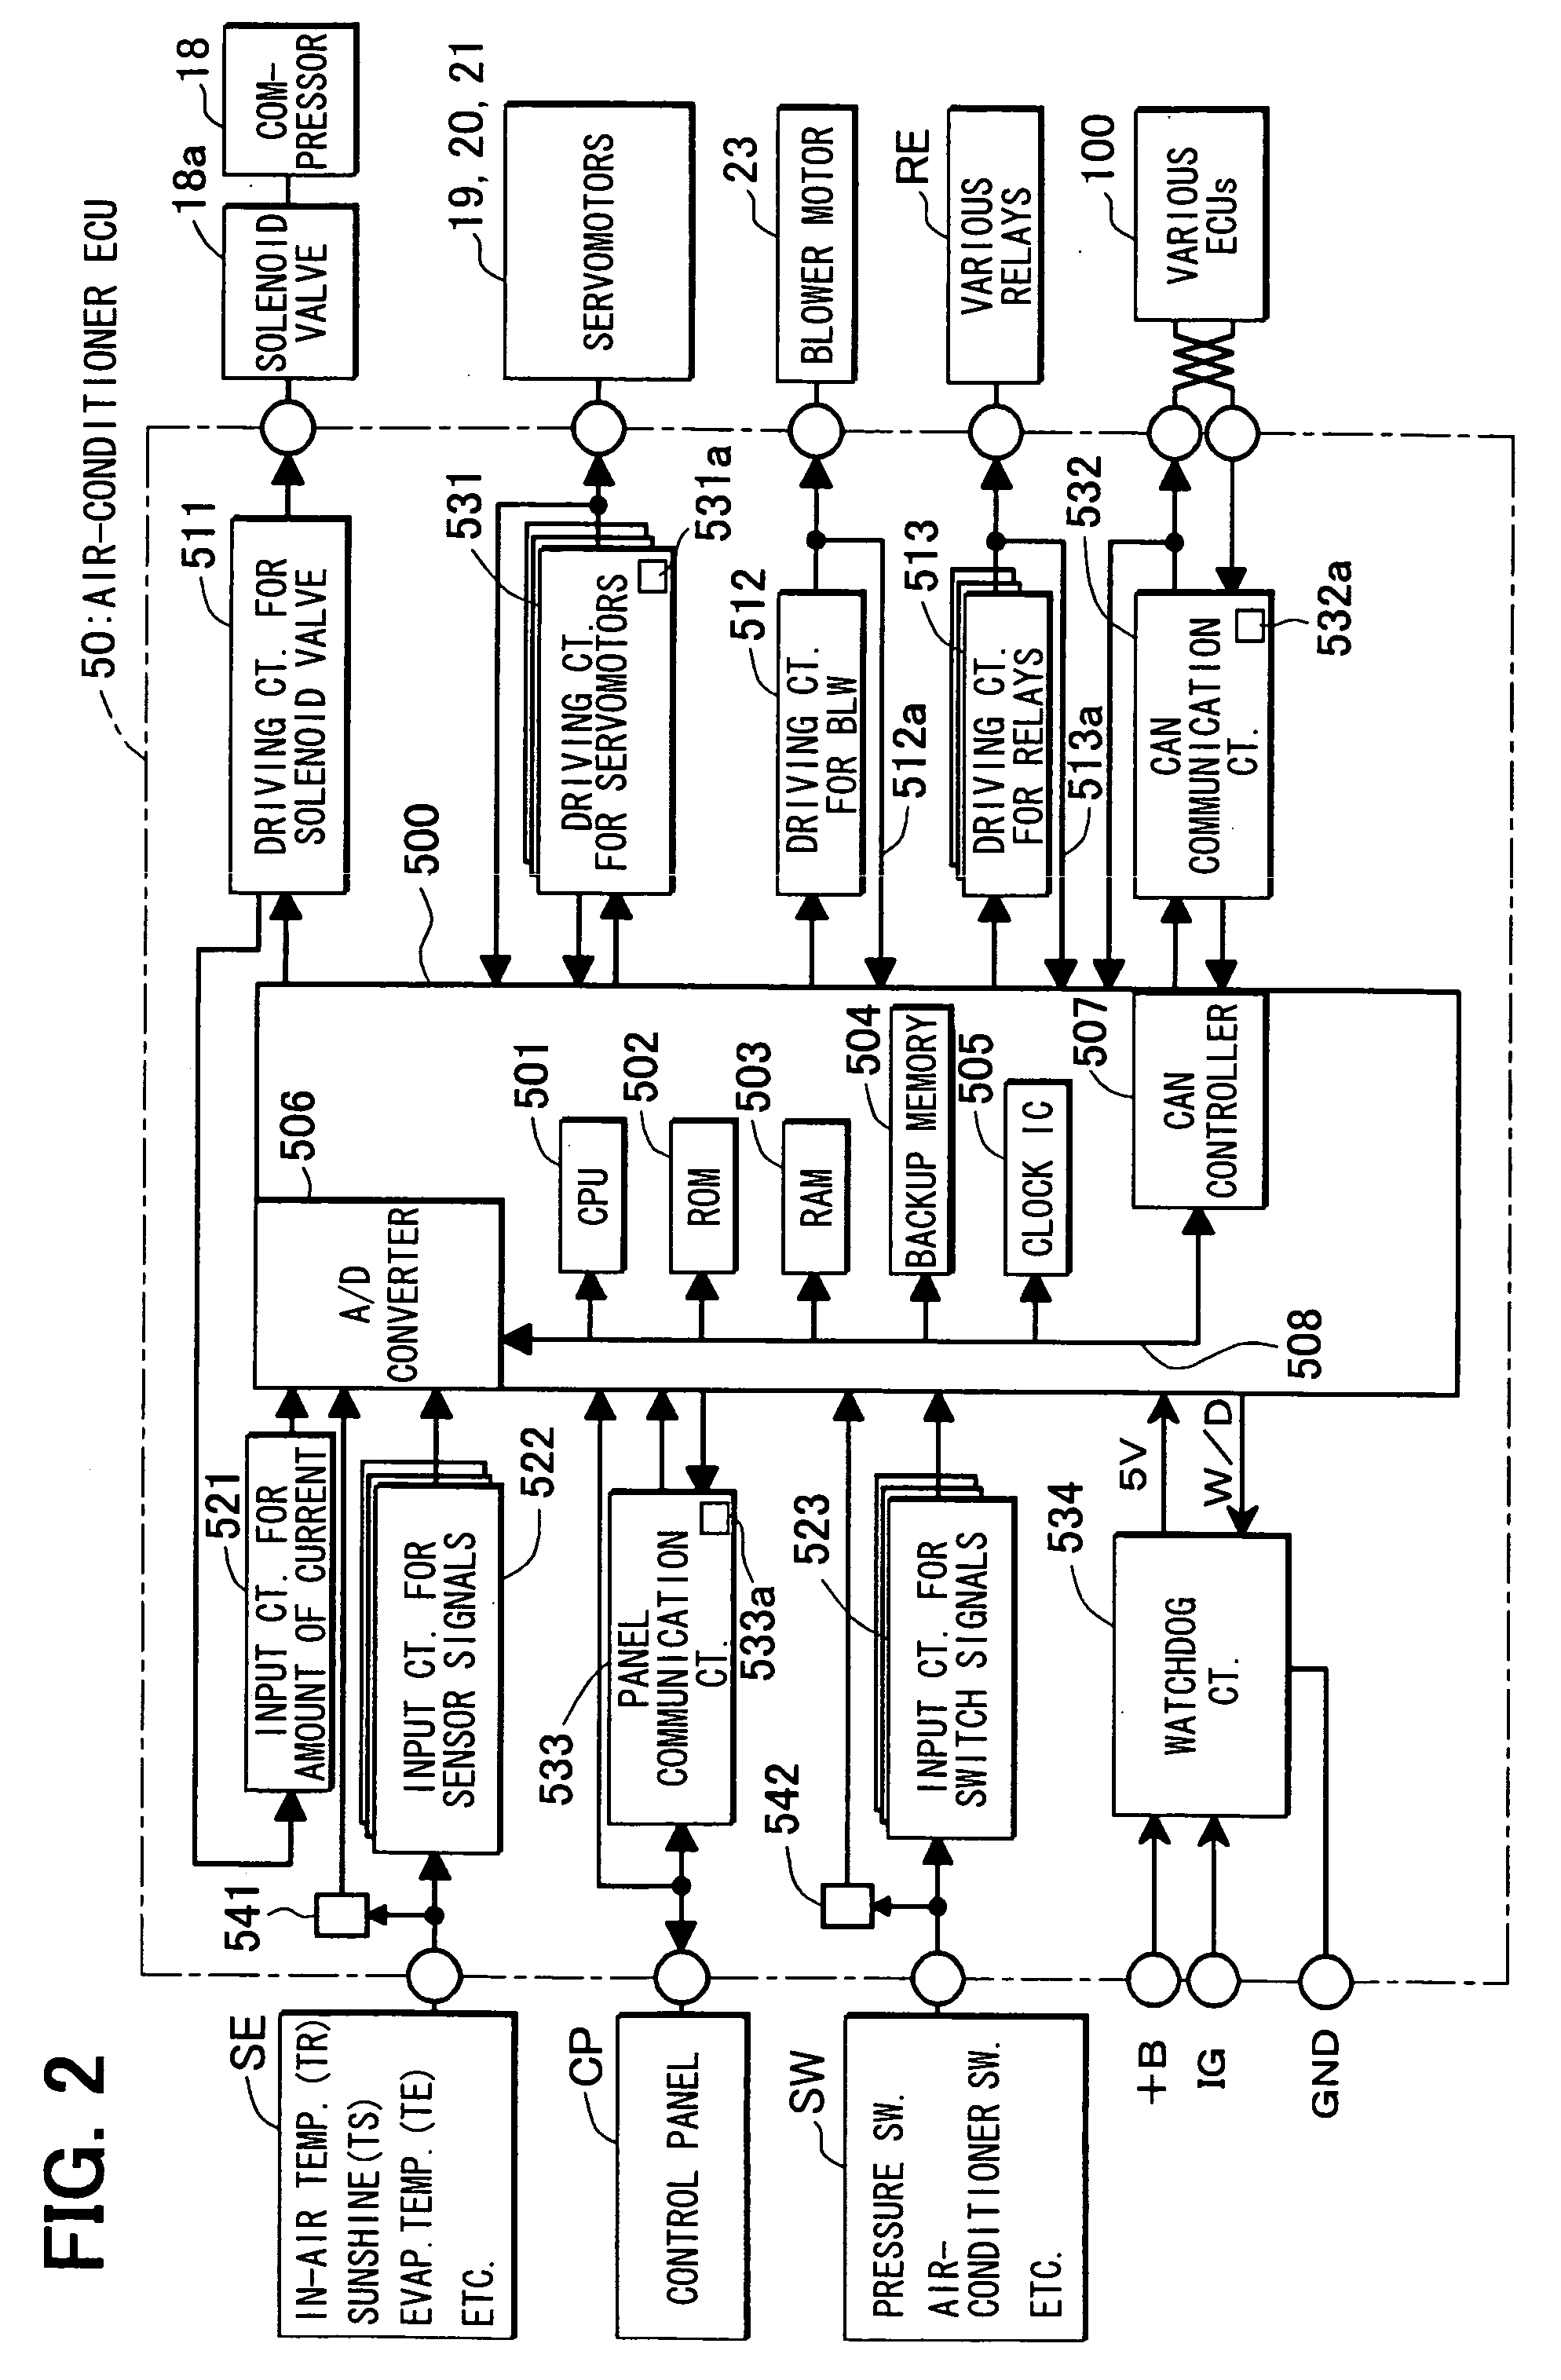 Control system for automotive vehicle having diagnosis function